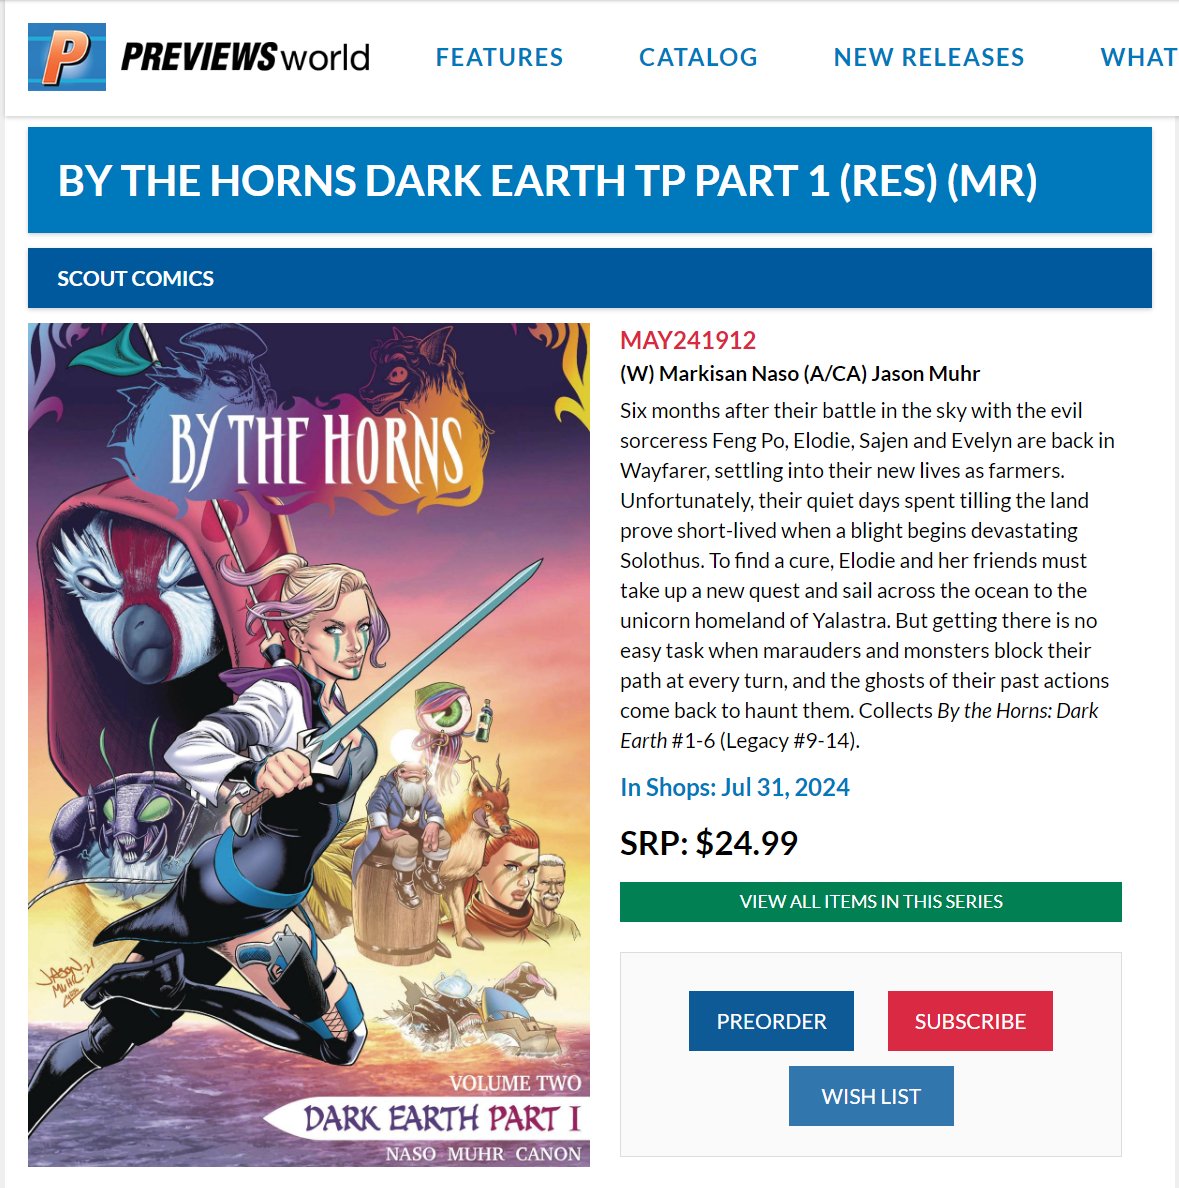 At long last, the BY THE HORNS Vol. 2 TPB is on its way to #comicbookstores! It collects the 1st half of BTH: Dark Earth (1-6), plus lots of back matter. You can preorder it NOW at your local comic shop! @BYTHEHORNScomic @ScoutComics @JasonMuhr @StevenCanon @Comic_Maven #comics